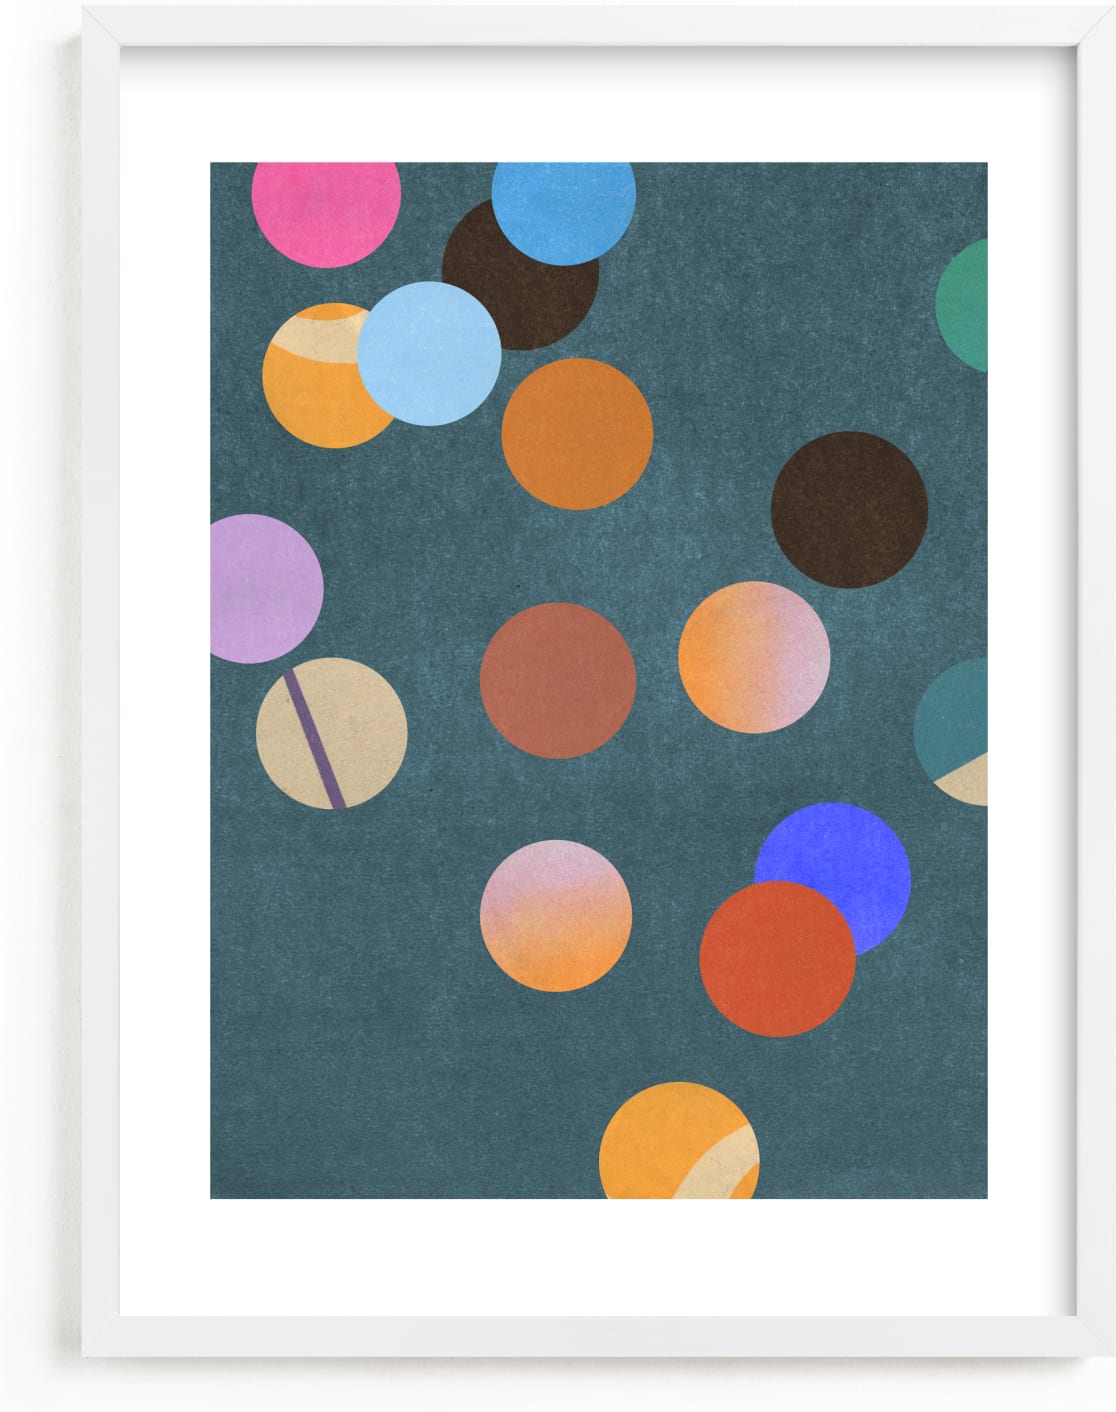 This is a colorful kids wall art by Sumak Studio called playful circles II.